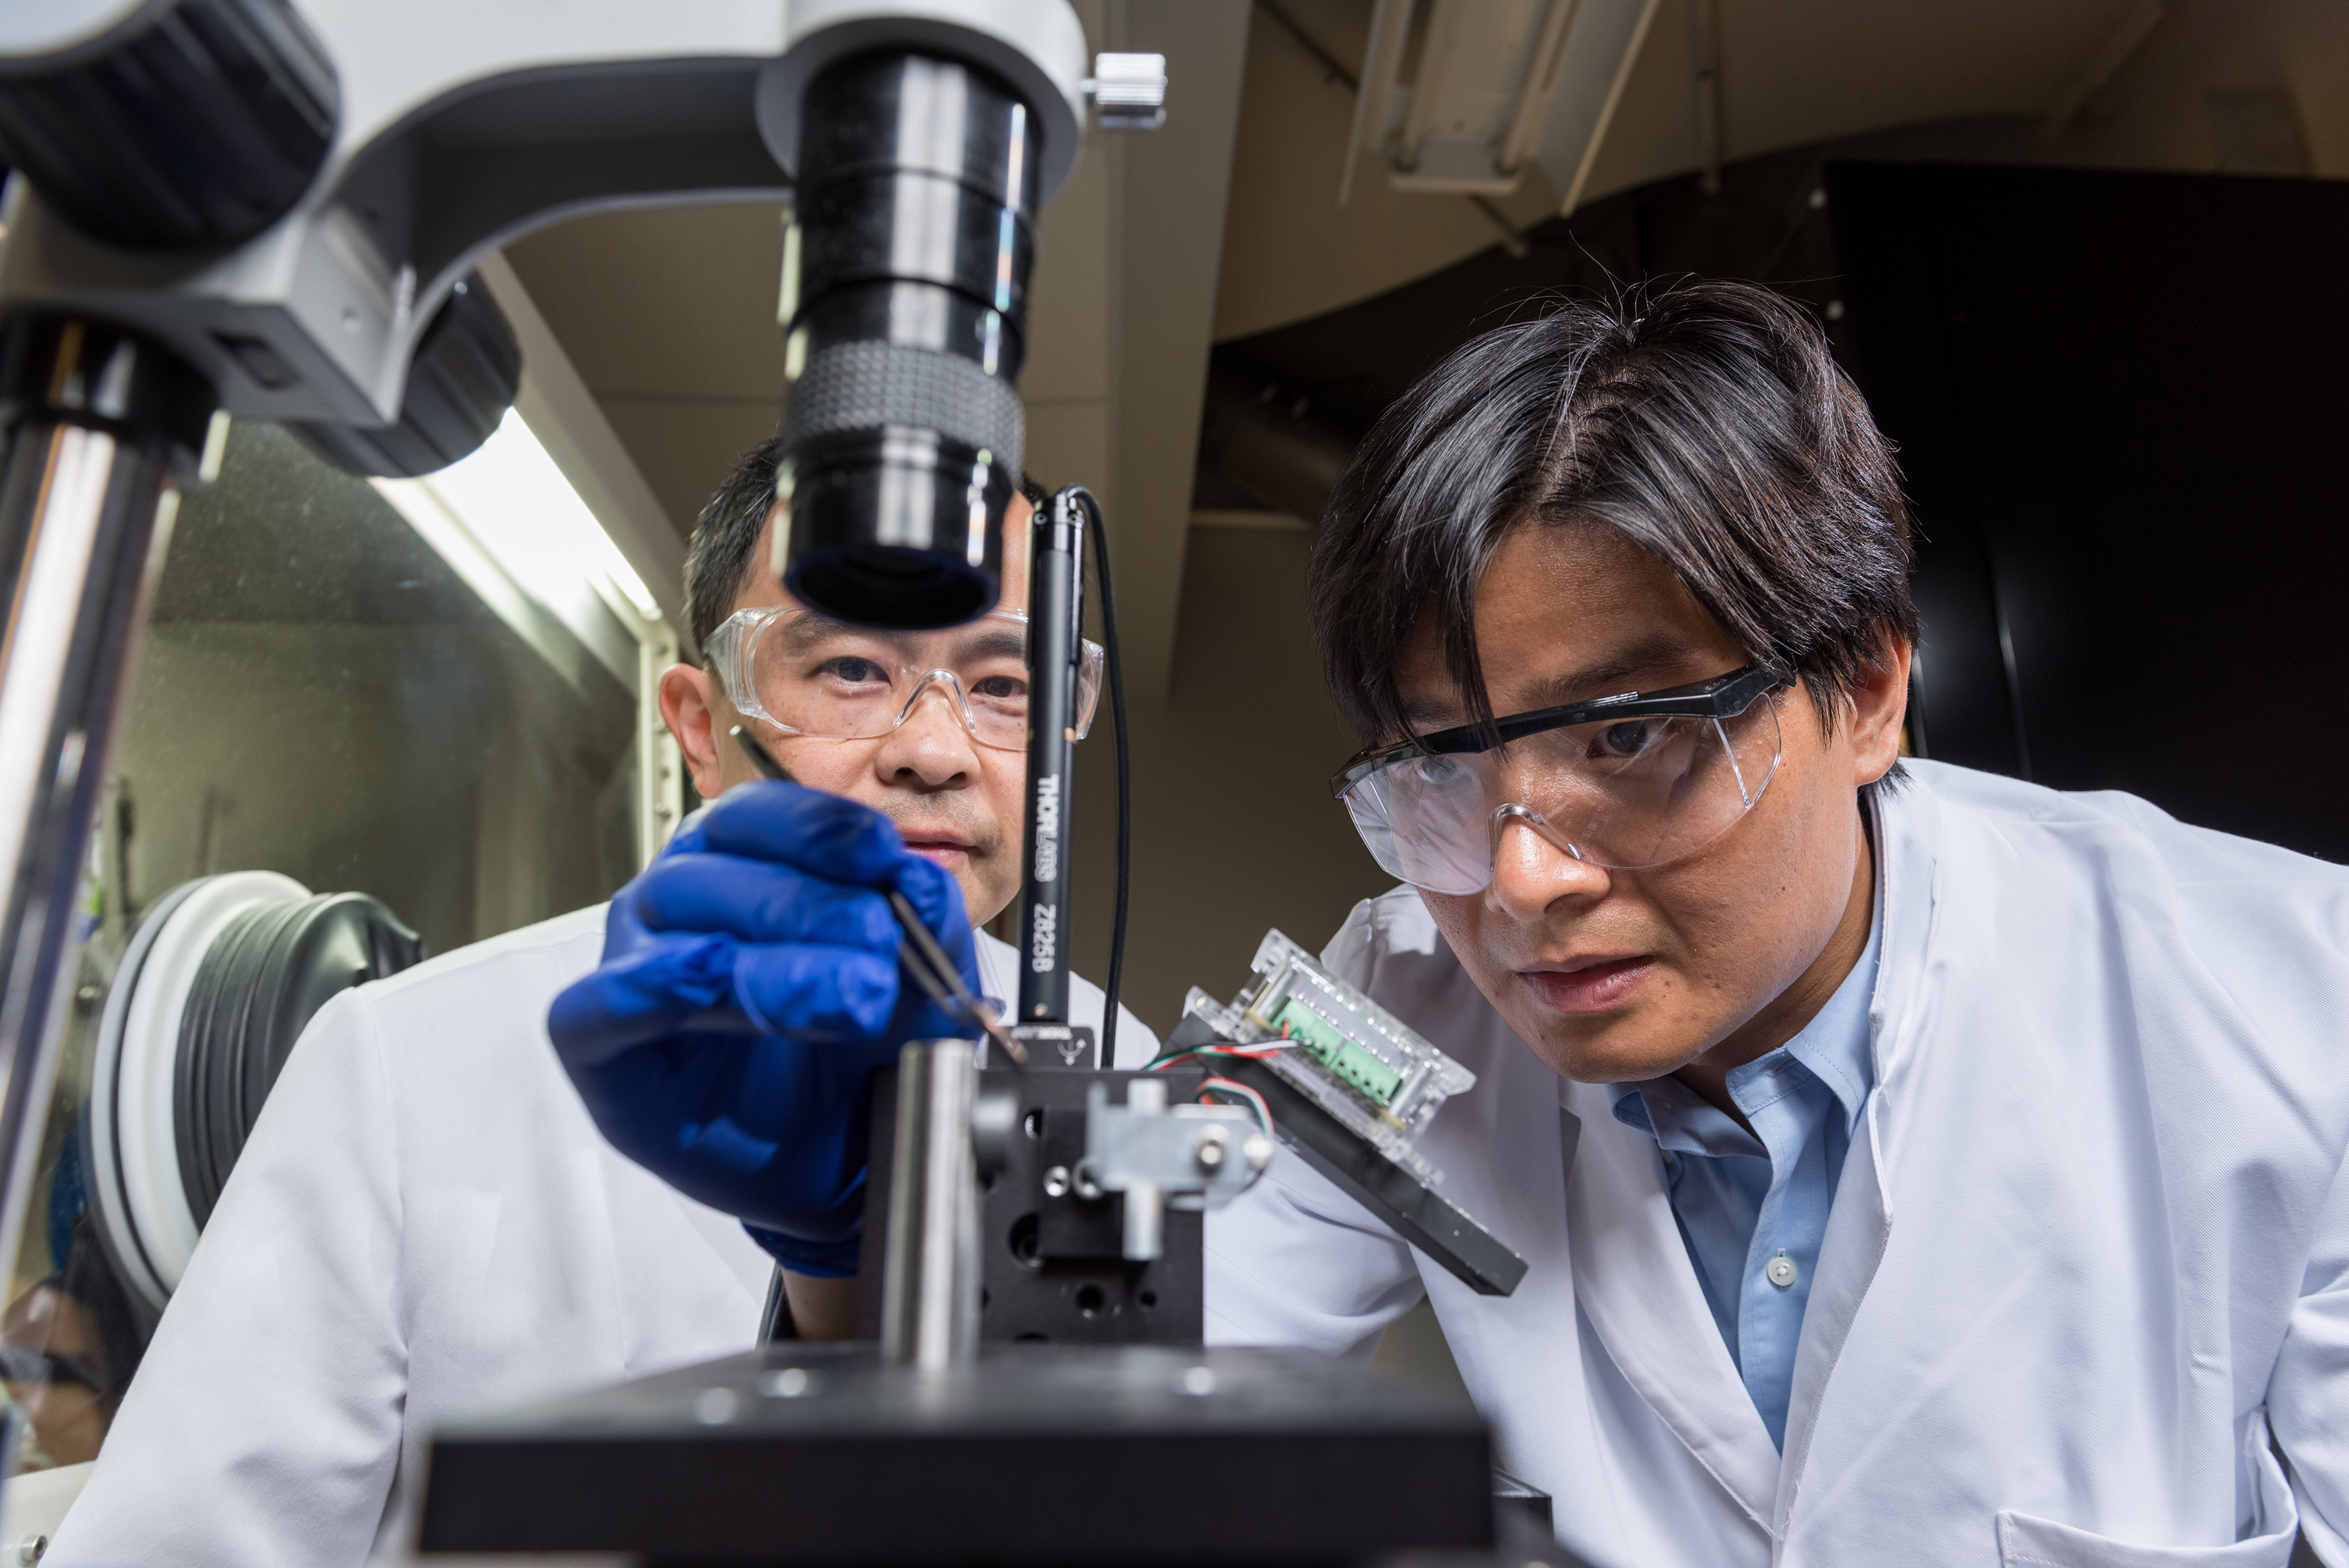 (Left to right) Professor Ting Zhu and Assistant Professor Shuman Xia, both from Georgia Tech’s Woodruff School of Mechanical Engineering, show how a thin film electrode made of amorphous silicon was tested in a custom environmental indenter. To provide proper environmental control, samples containing lithiated silicon were tested with the device inside the glovebox shown in the background. (Credit: Rob Felt, Georgia Tech)